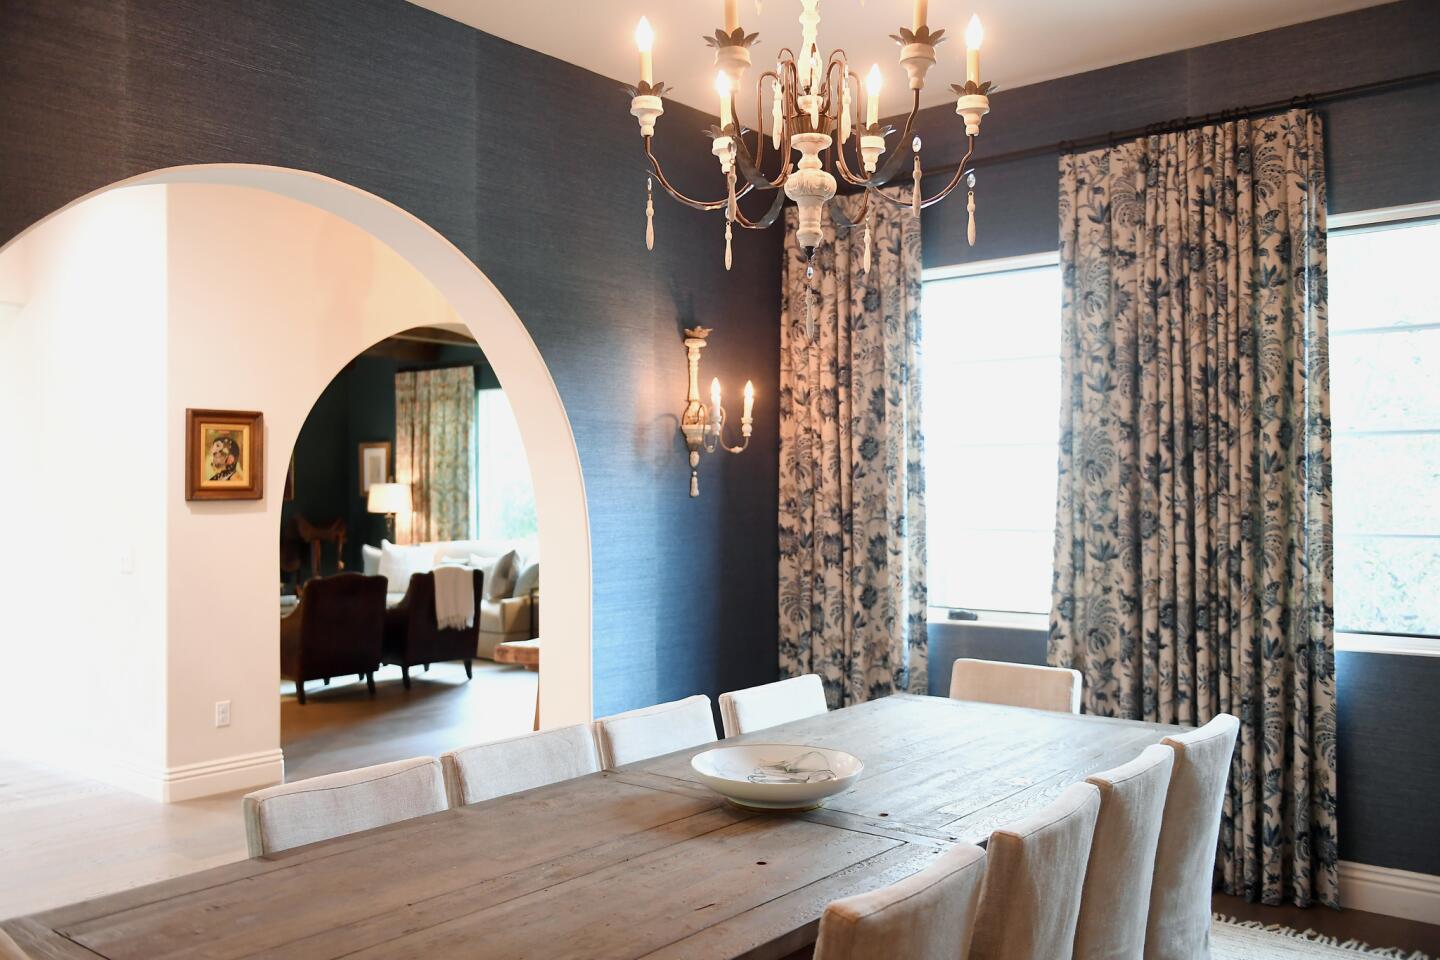 The dining room of Leura Fine's Los Angeles home, the owner of the online interior design firm, Laur